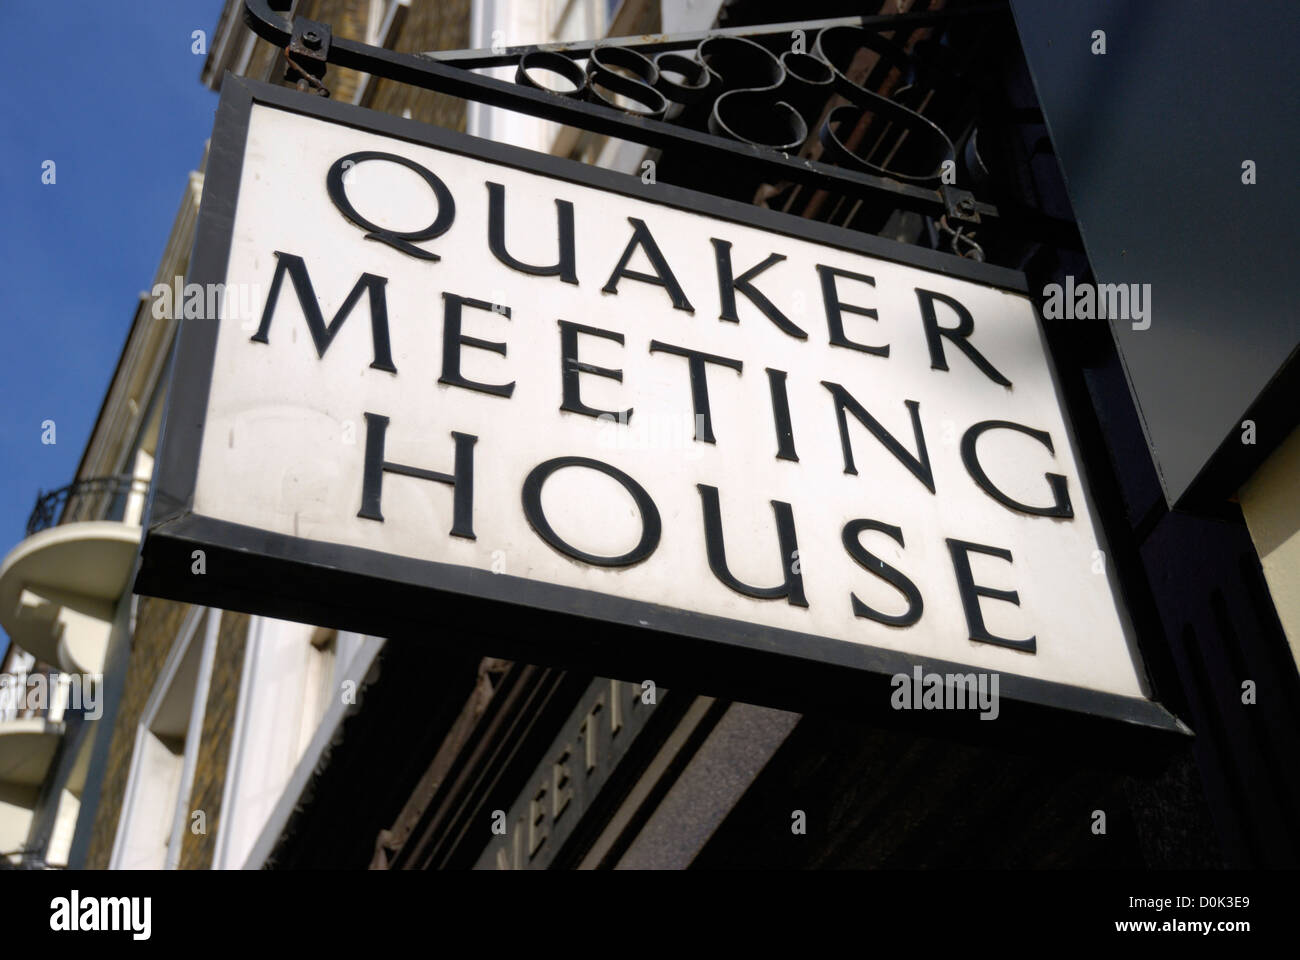 Quaker Meeting House sign in St Martin's Lane. Stock Photo